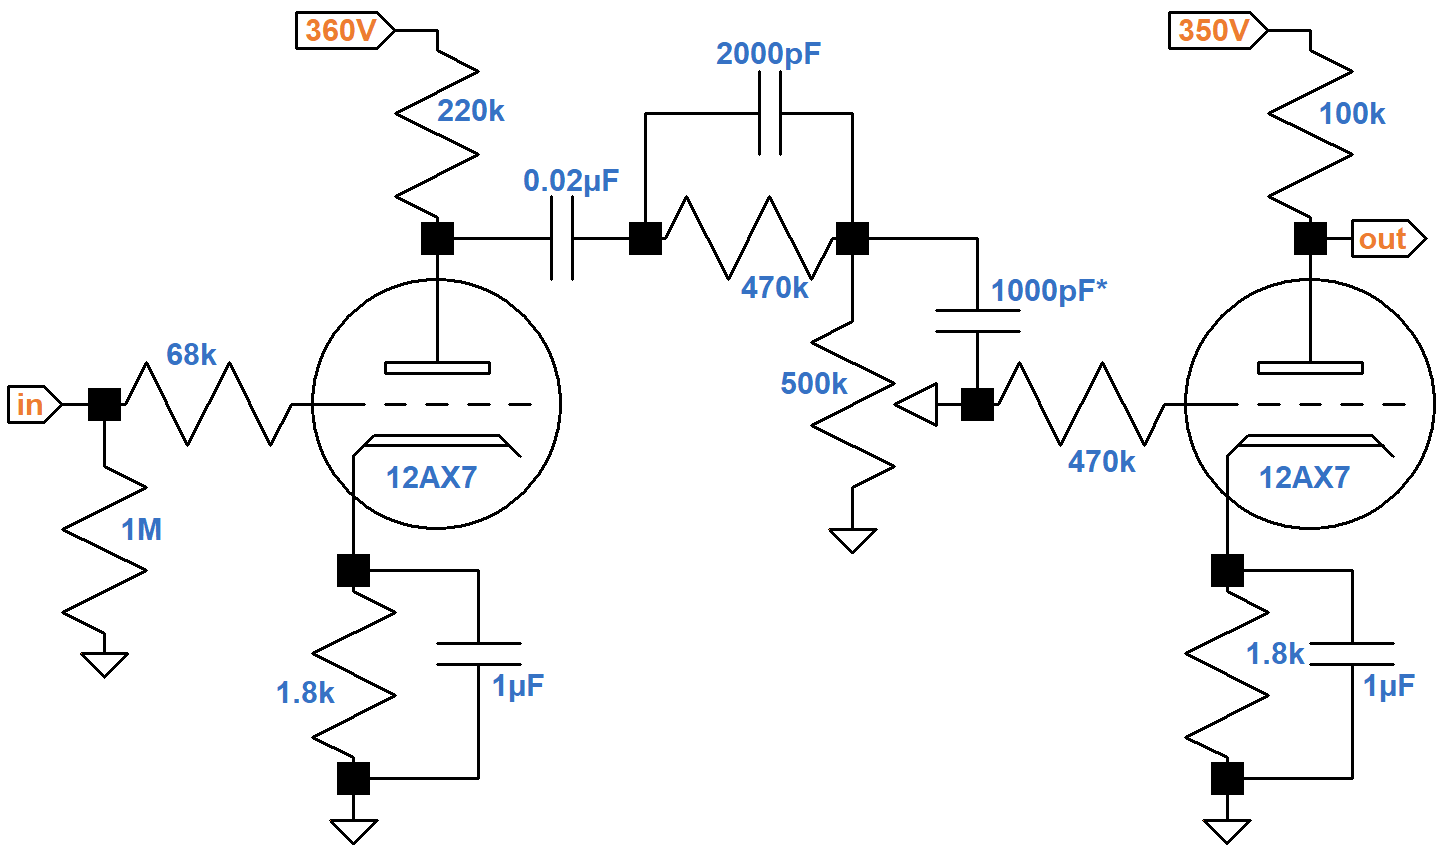 Soldano SLO schematic of the first stage